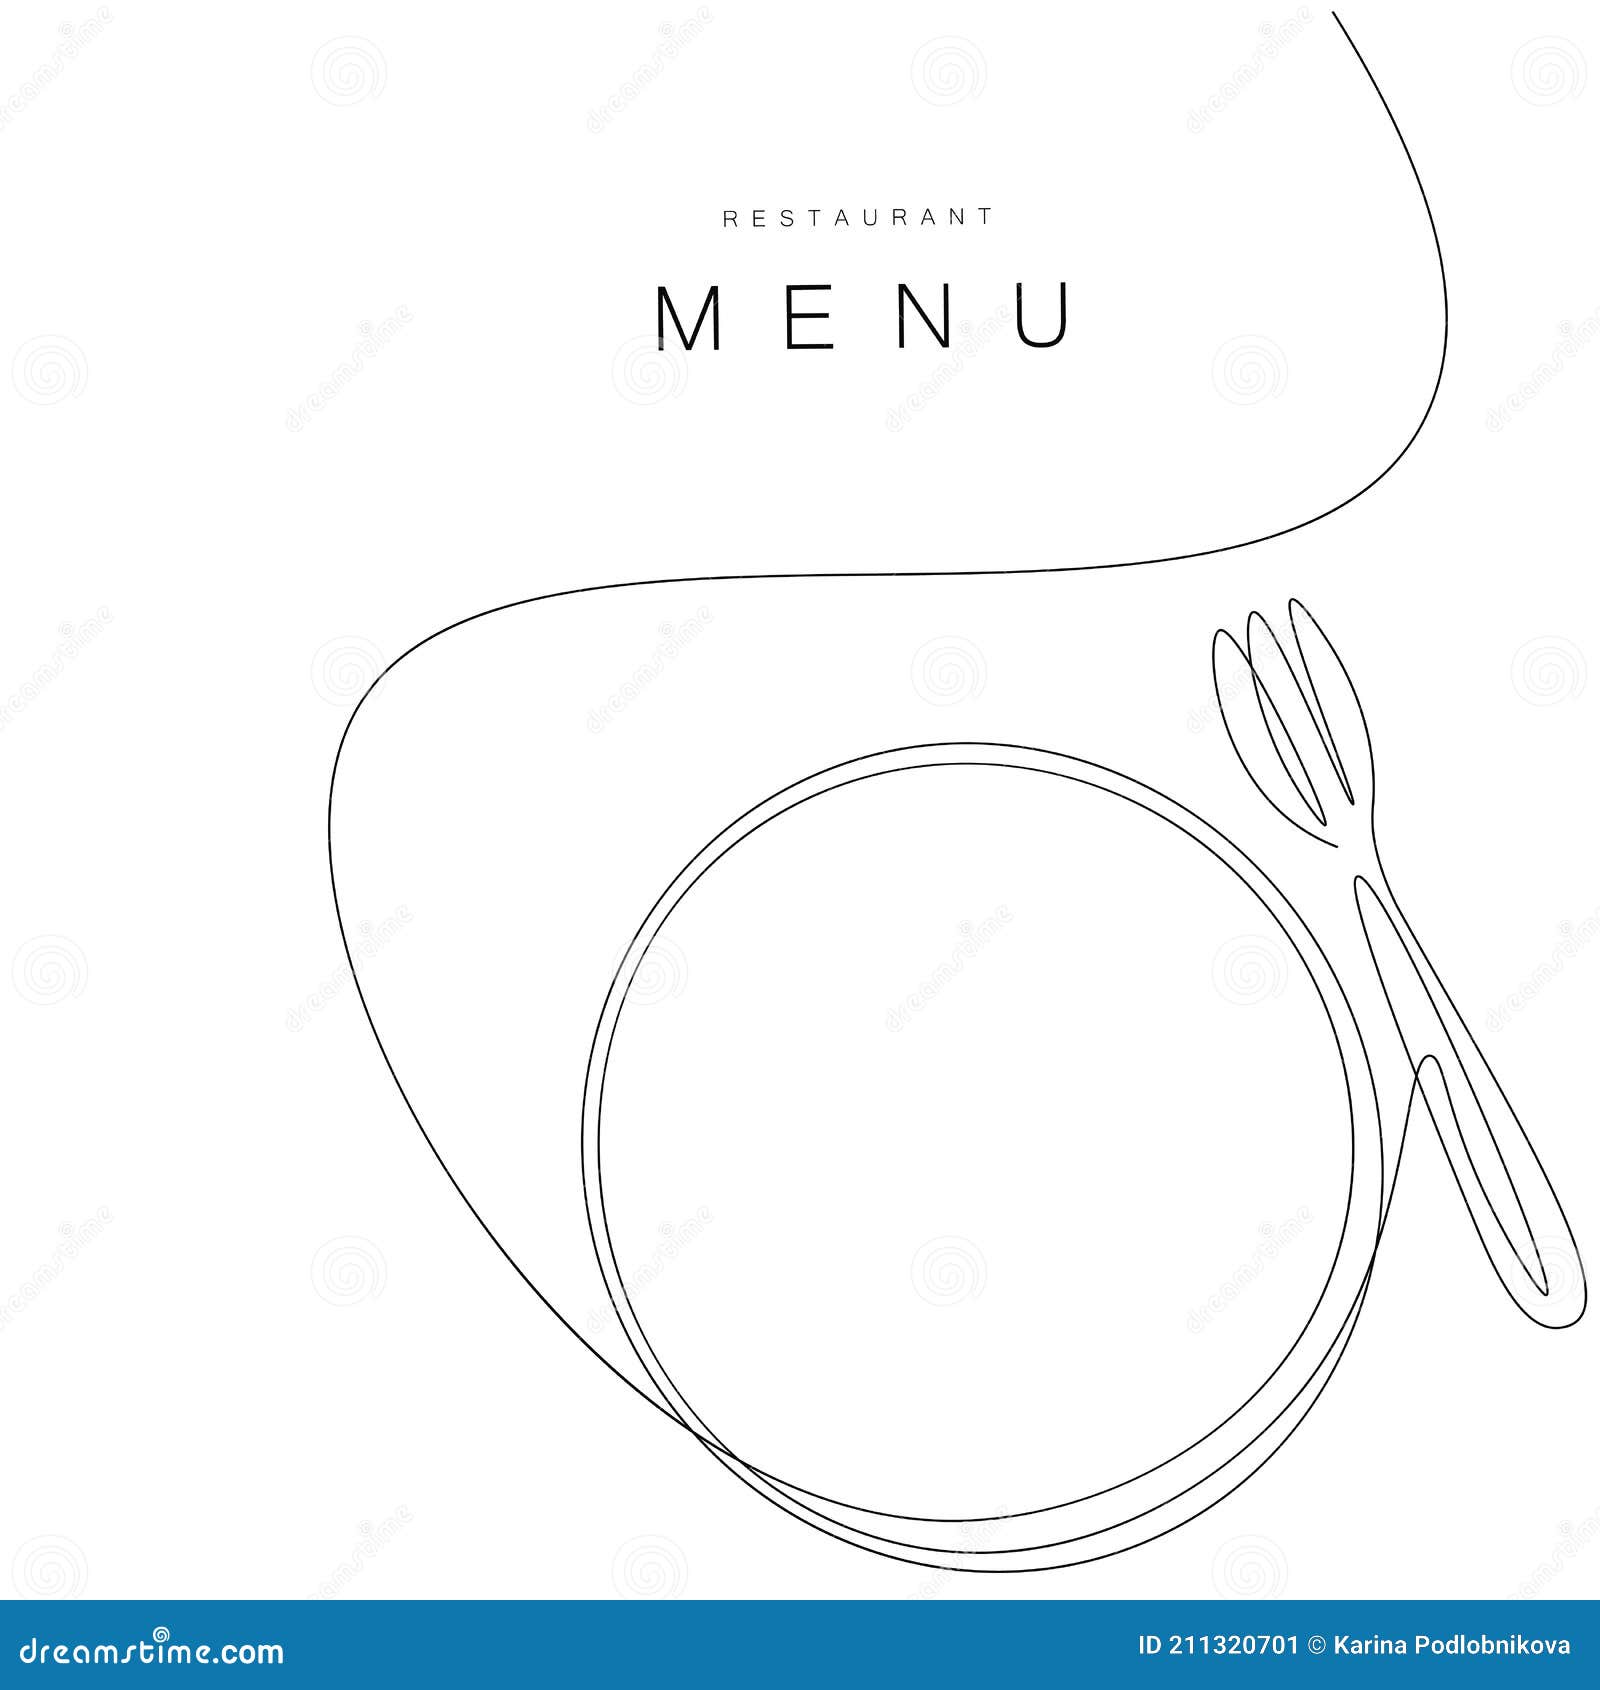 Menu Restaurant Background Silhouette Line Drawing on White Background  Design Food Stock Vector - Illustration of restaurant, drawing: 211320701